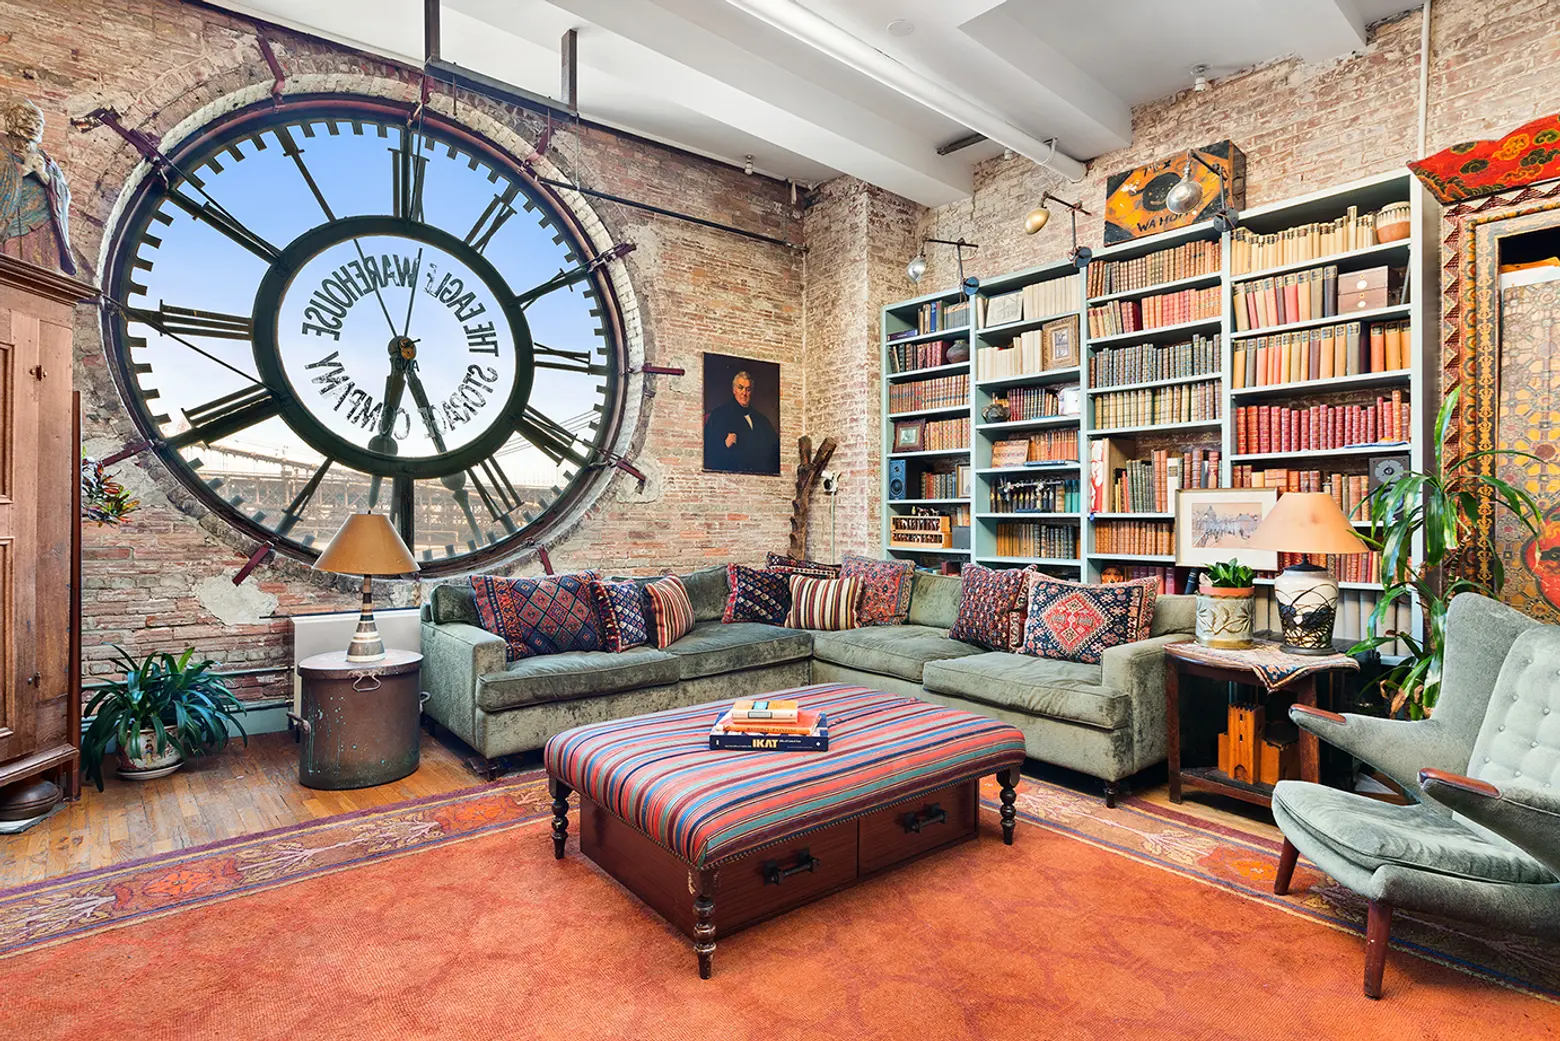 In Brooklyn Heights’ Eagle Warehouse, live behind a 19th-century industrial clock for $2.35M